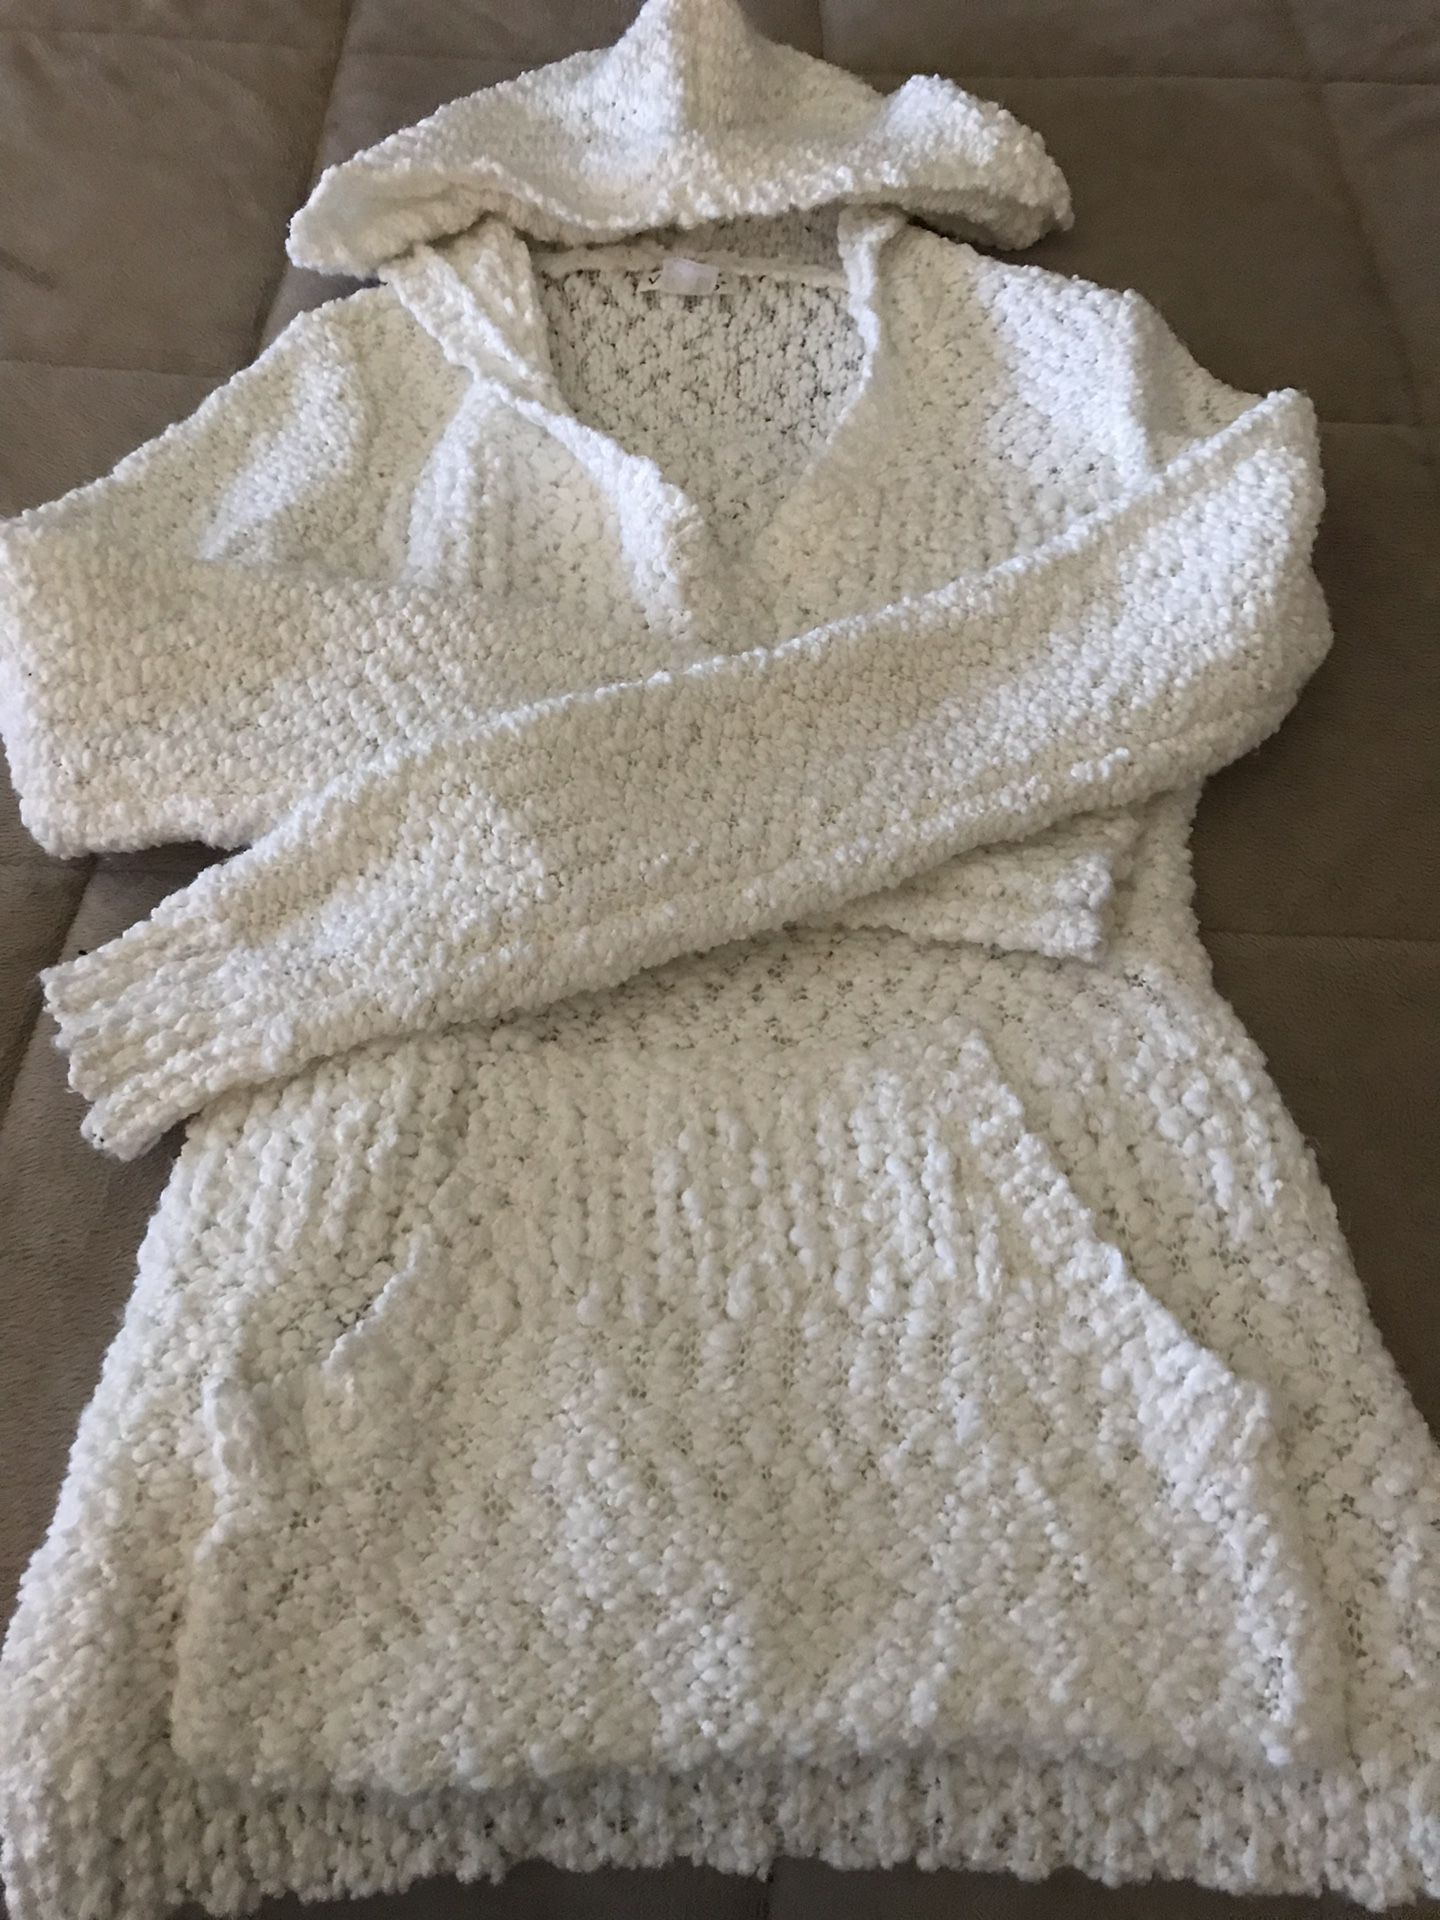 Venus clothing-sweater with hood-New for Sale in Goodyear, AZ - OfferUp